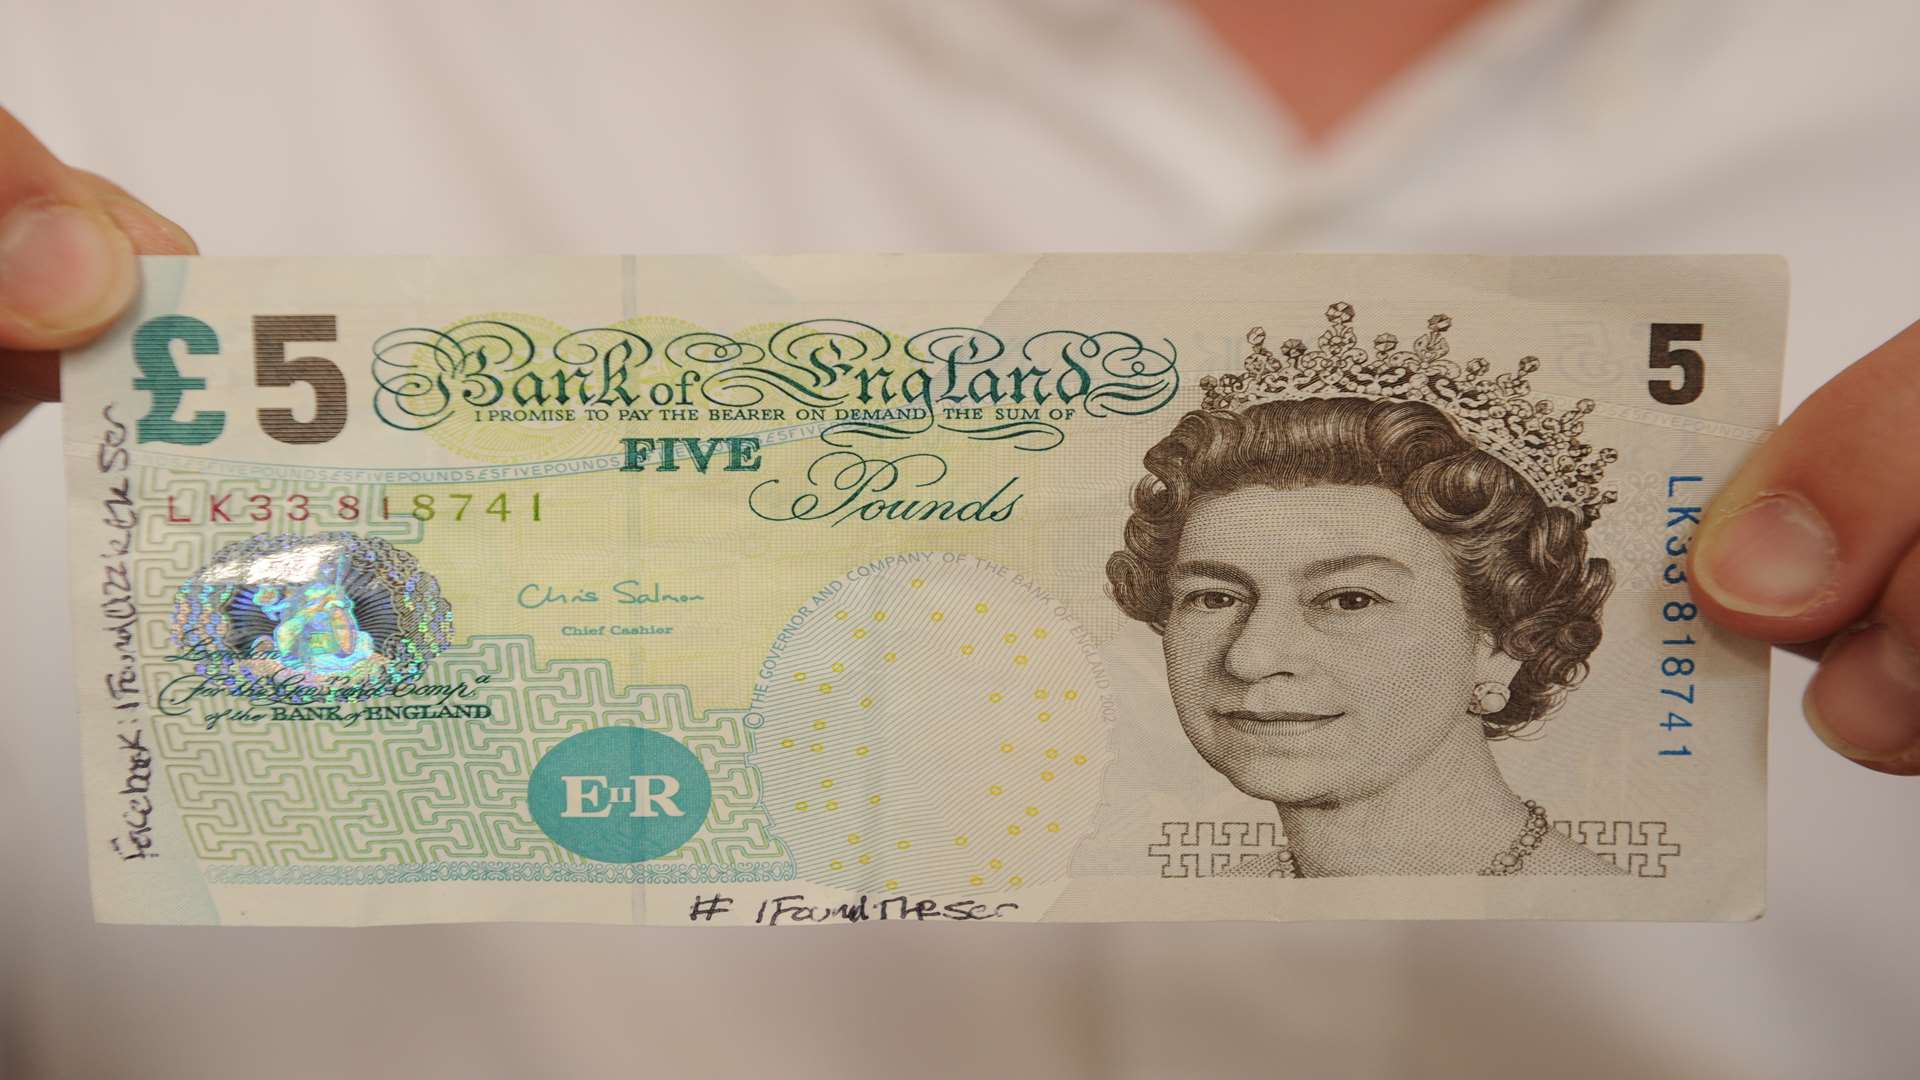 The £5 note used in the experiment. Picture: Steve Crispe